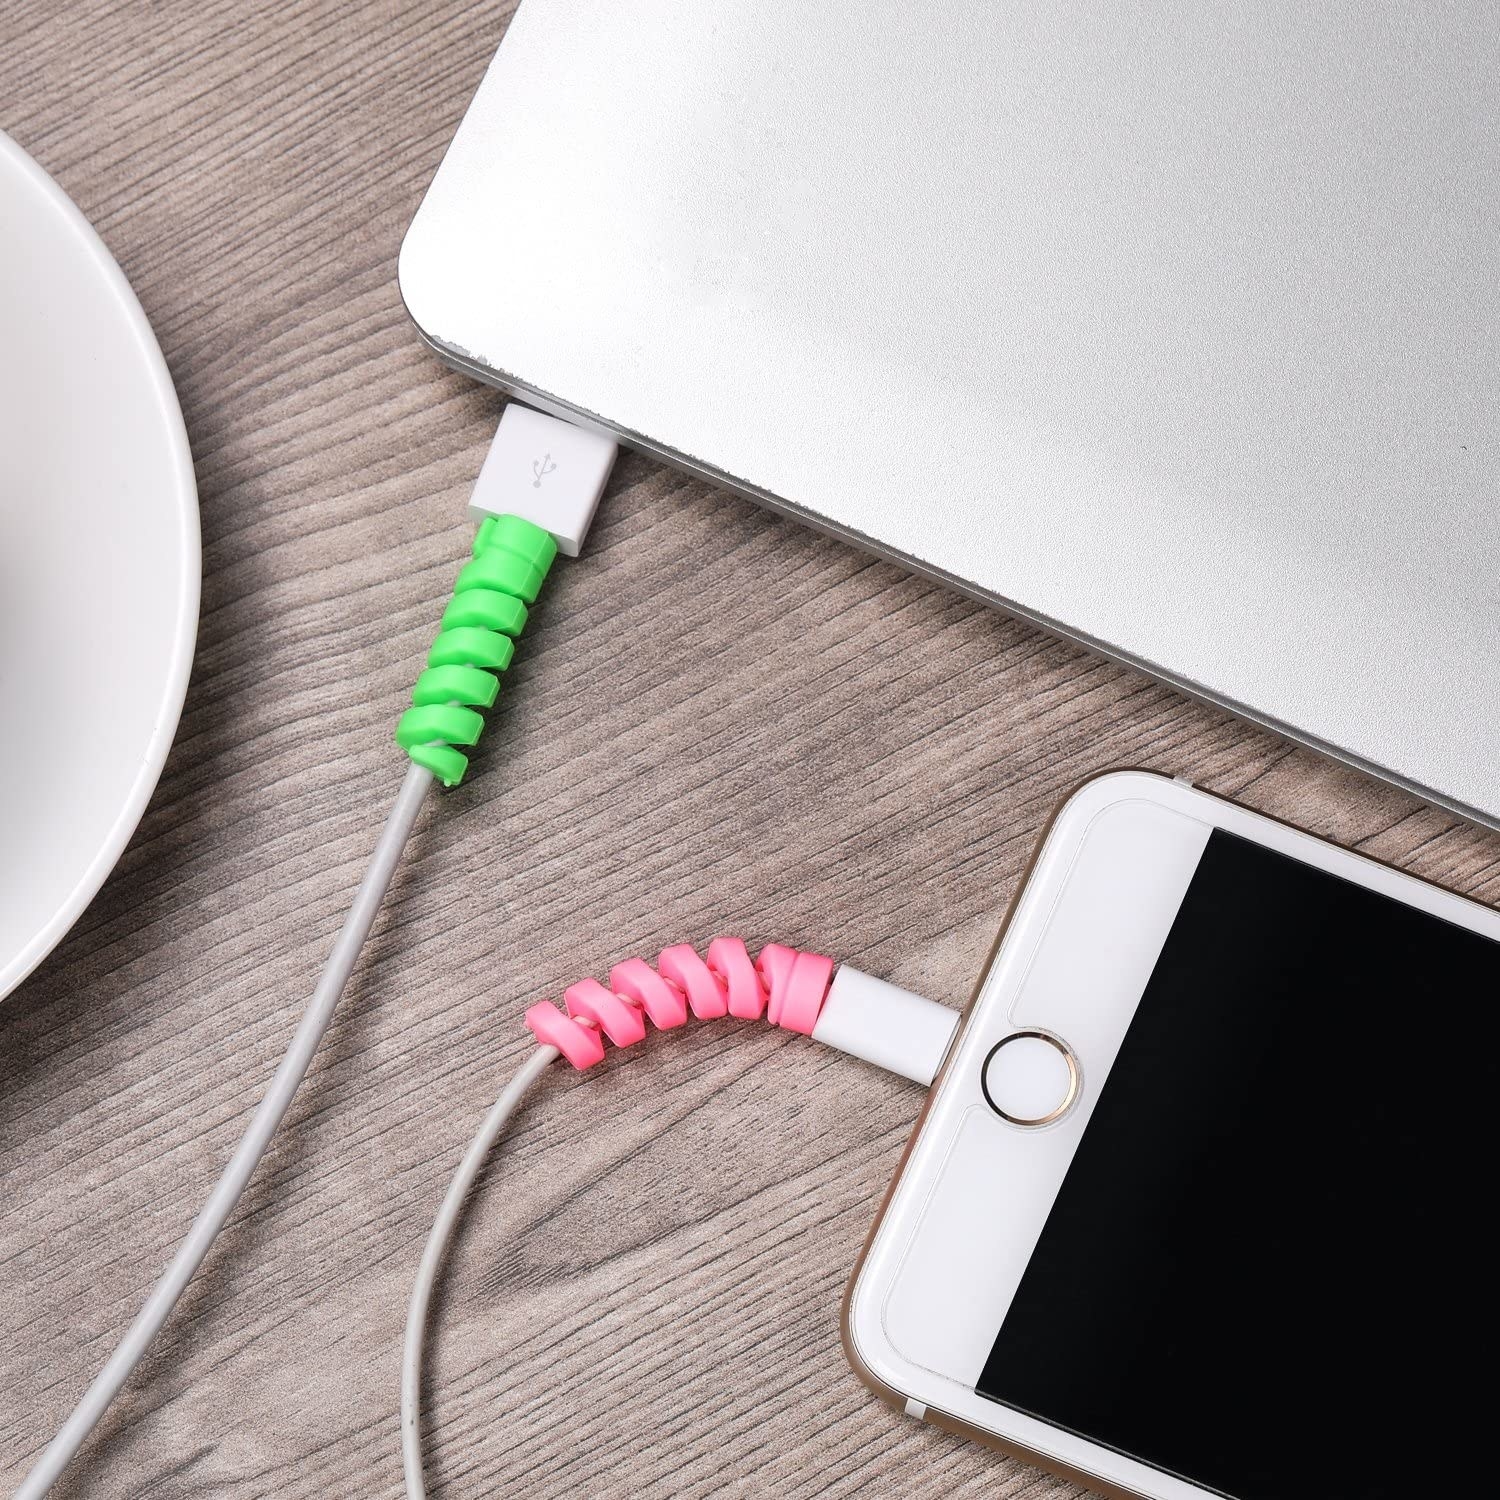 Product photo showing Jetec cable savers used on both a phone and laptop chargers